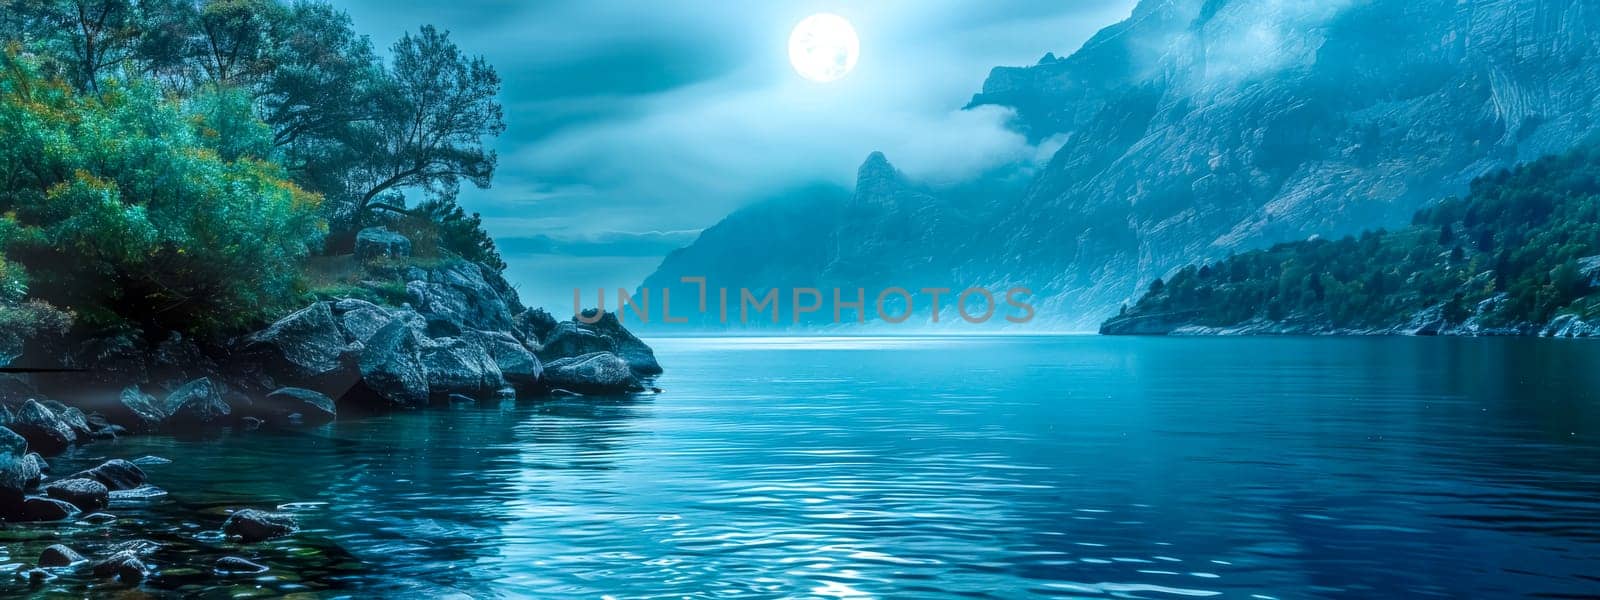 Serene night scene with a luminous full moon over a tranquil mountain lake by Edophoto